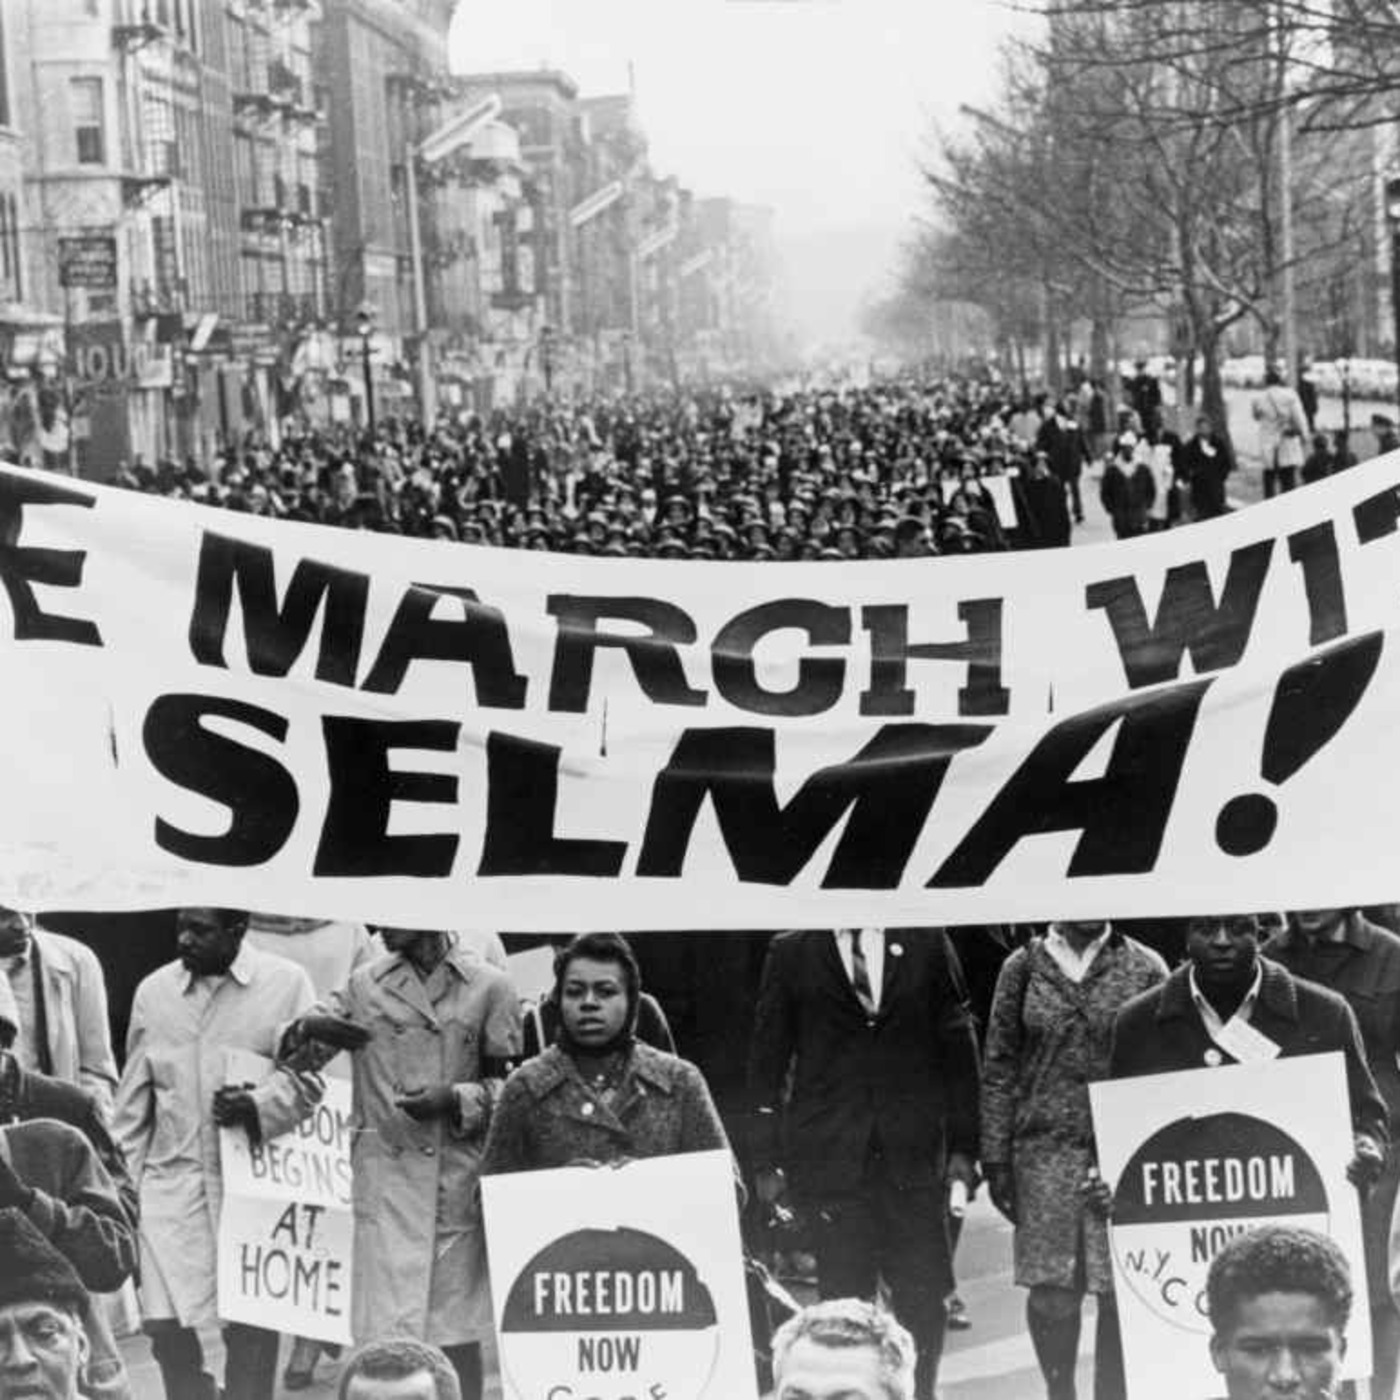 Episode 2237: The Honorable Dr. Thad McClammy on Selma, Bloody Sunday, Voter's Rights, Foot Soldier's Then & Now & Why Our Vote Matters!